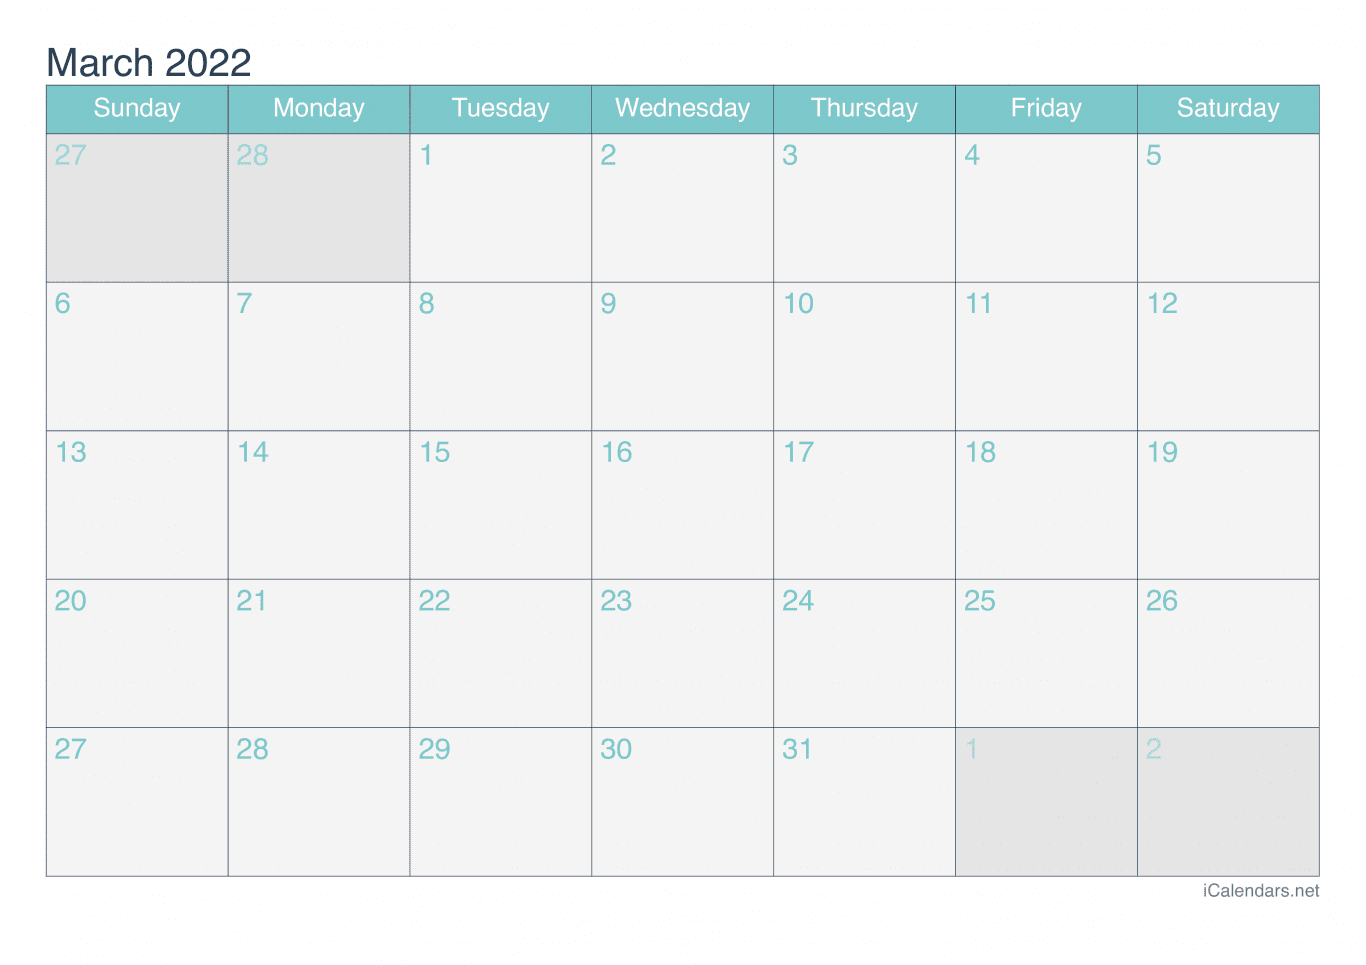 2022 March Calendar - Turquoise